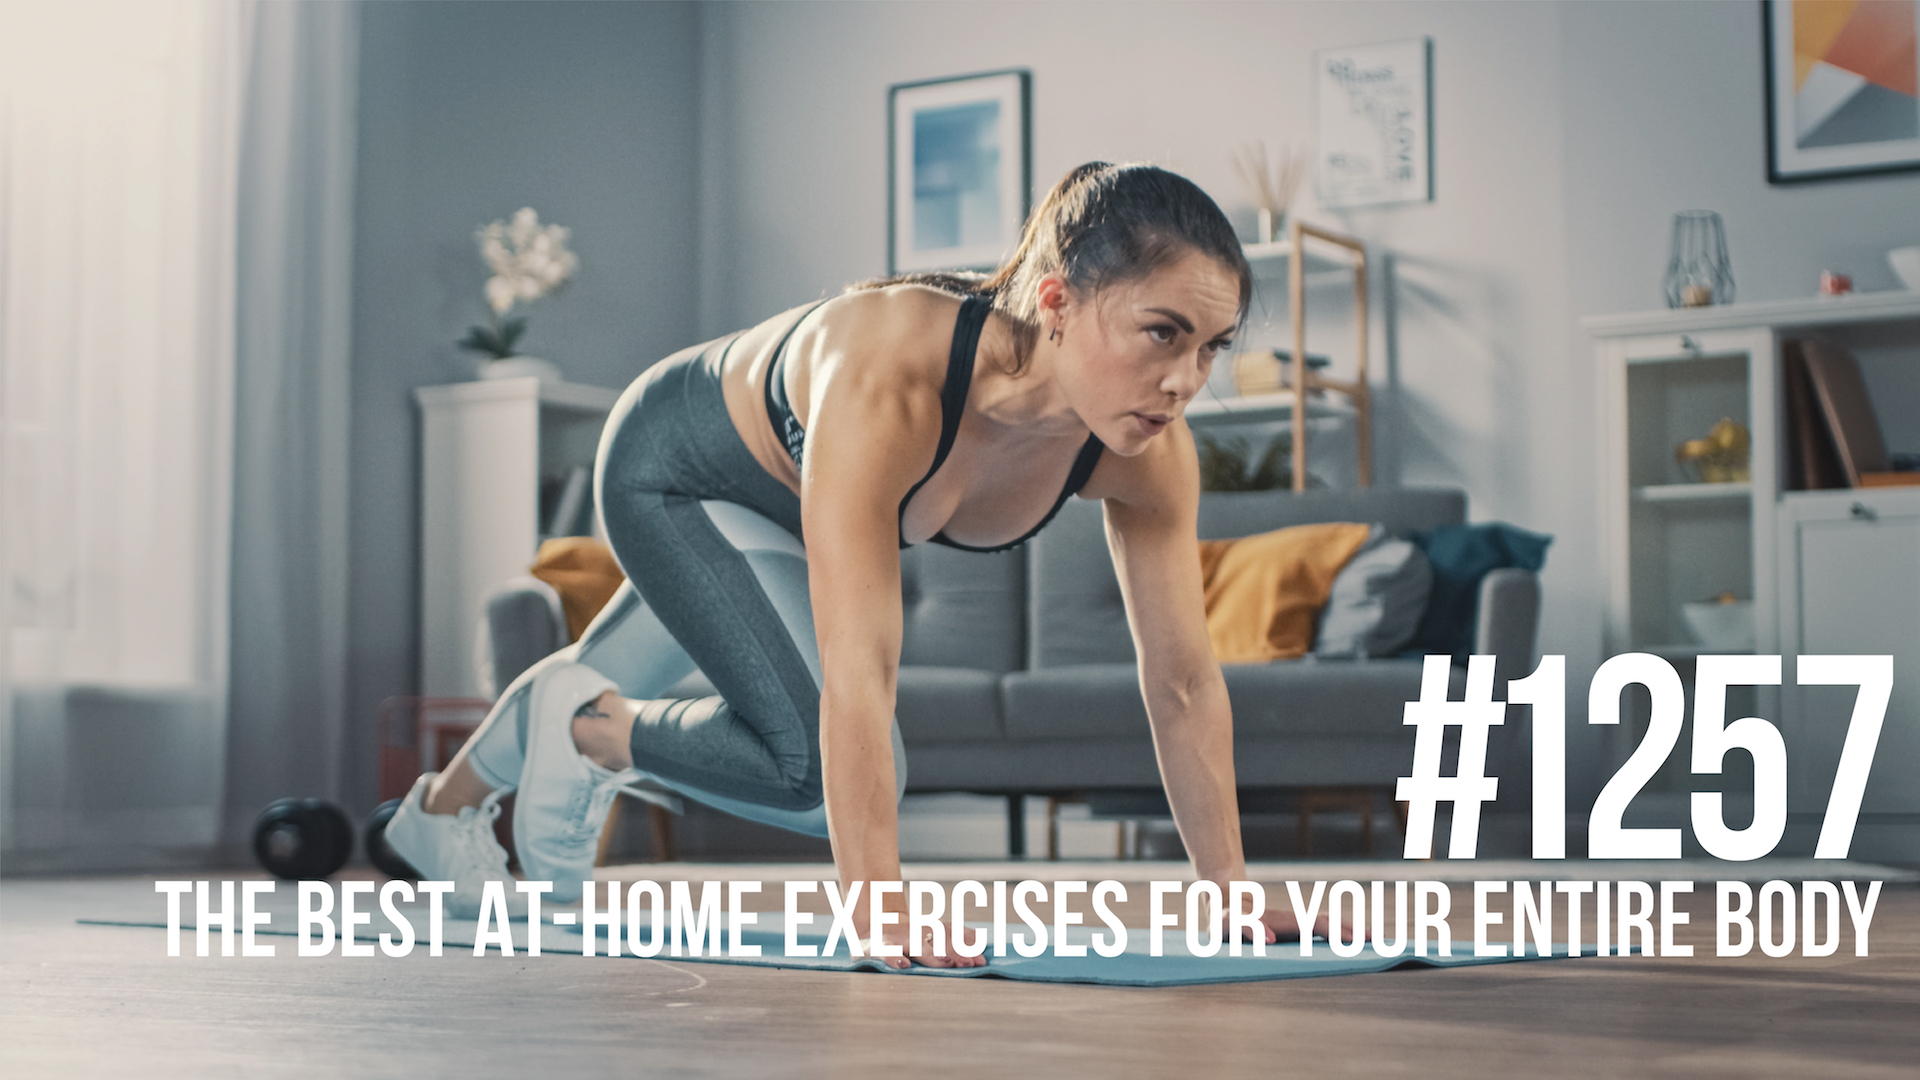 1257: The Best At-Home Exercises for Your Entire Body